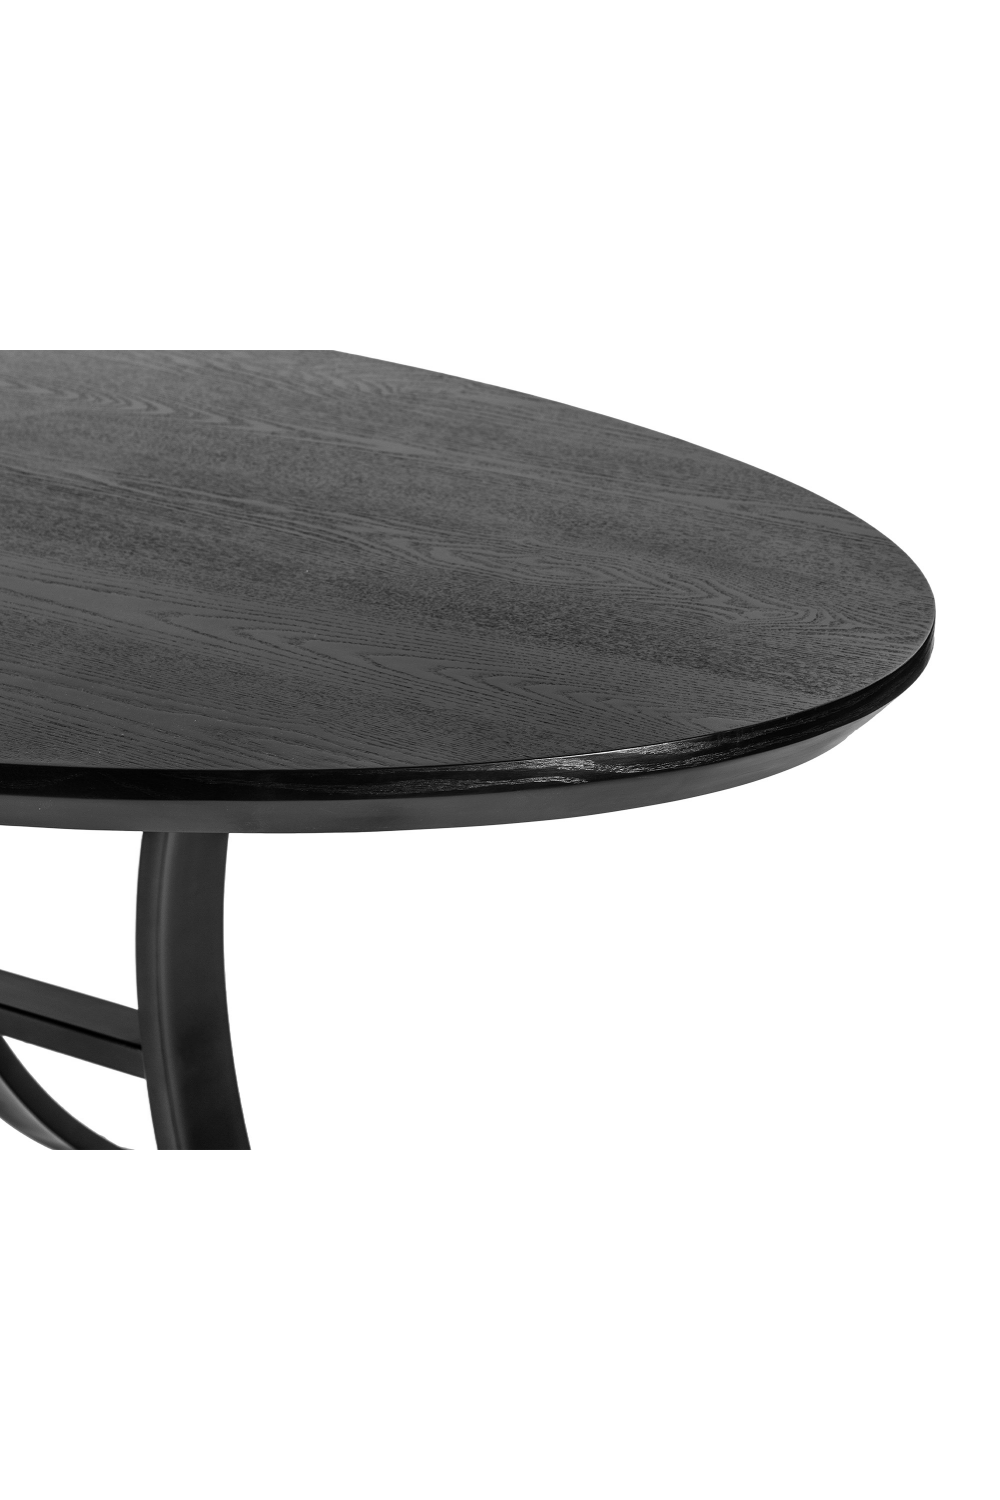 Black Wooden Oval Dining Table | Liang & Eimil Isola | Oroa.com